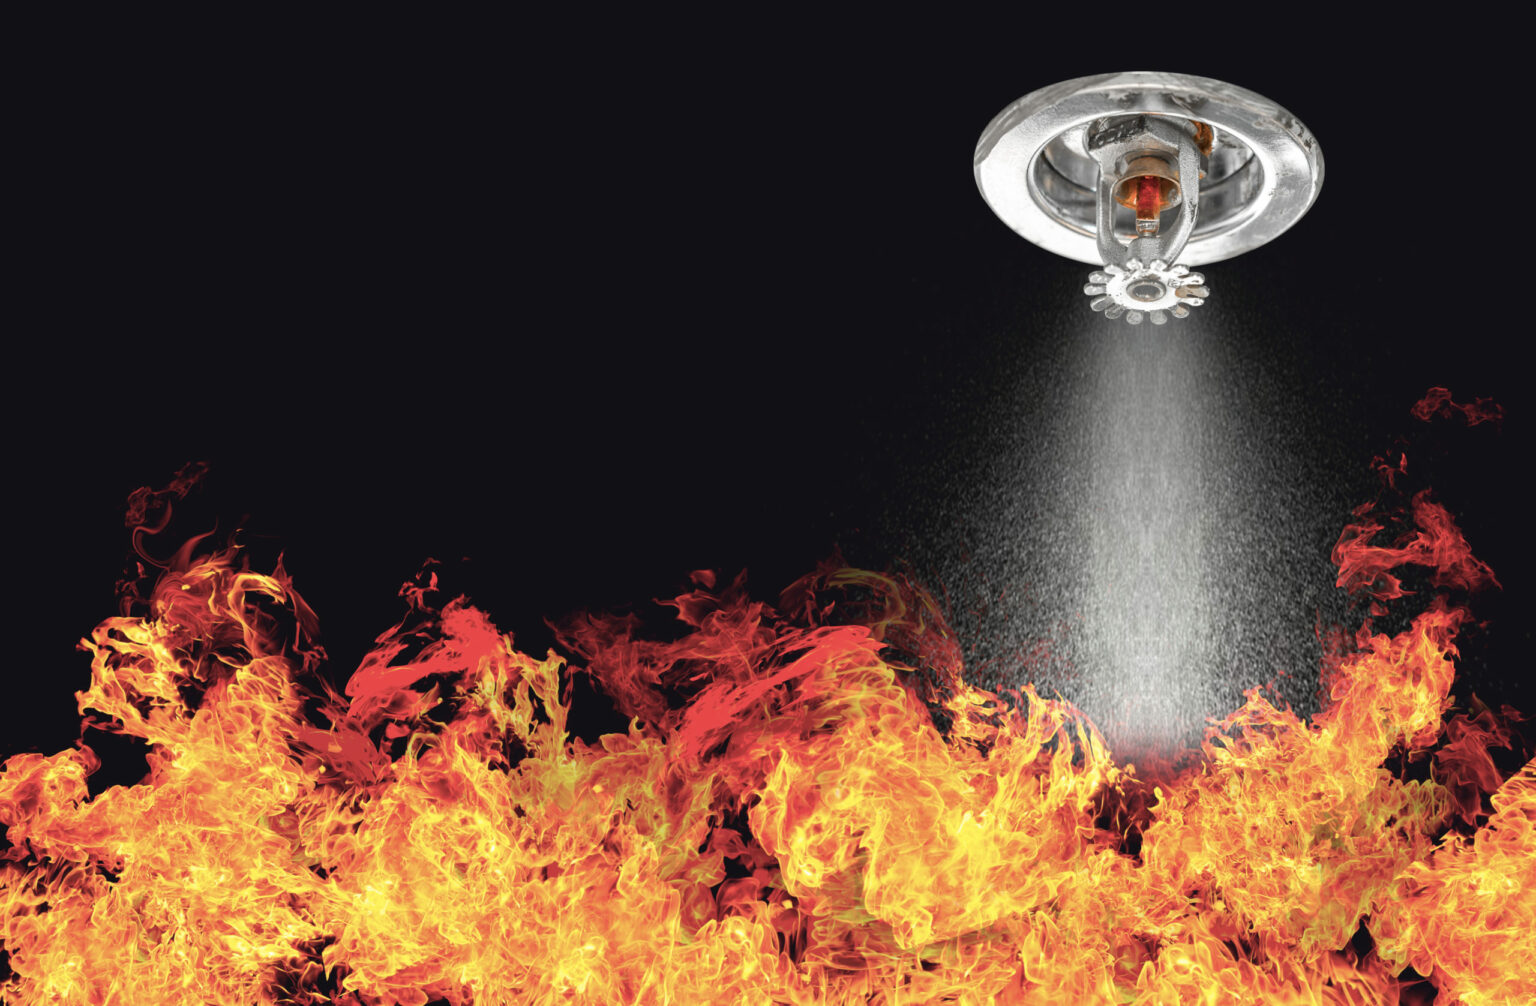 Ceramic Glazing and sprinklers could offer alternative fire protection